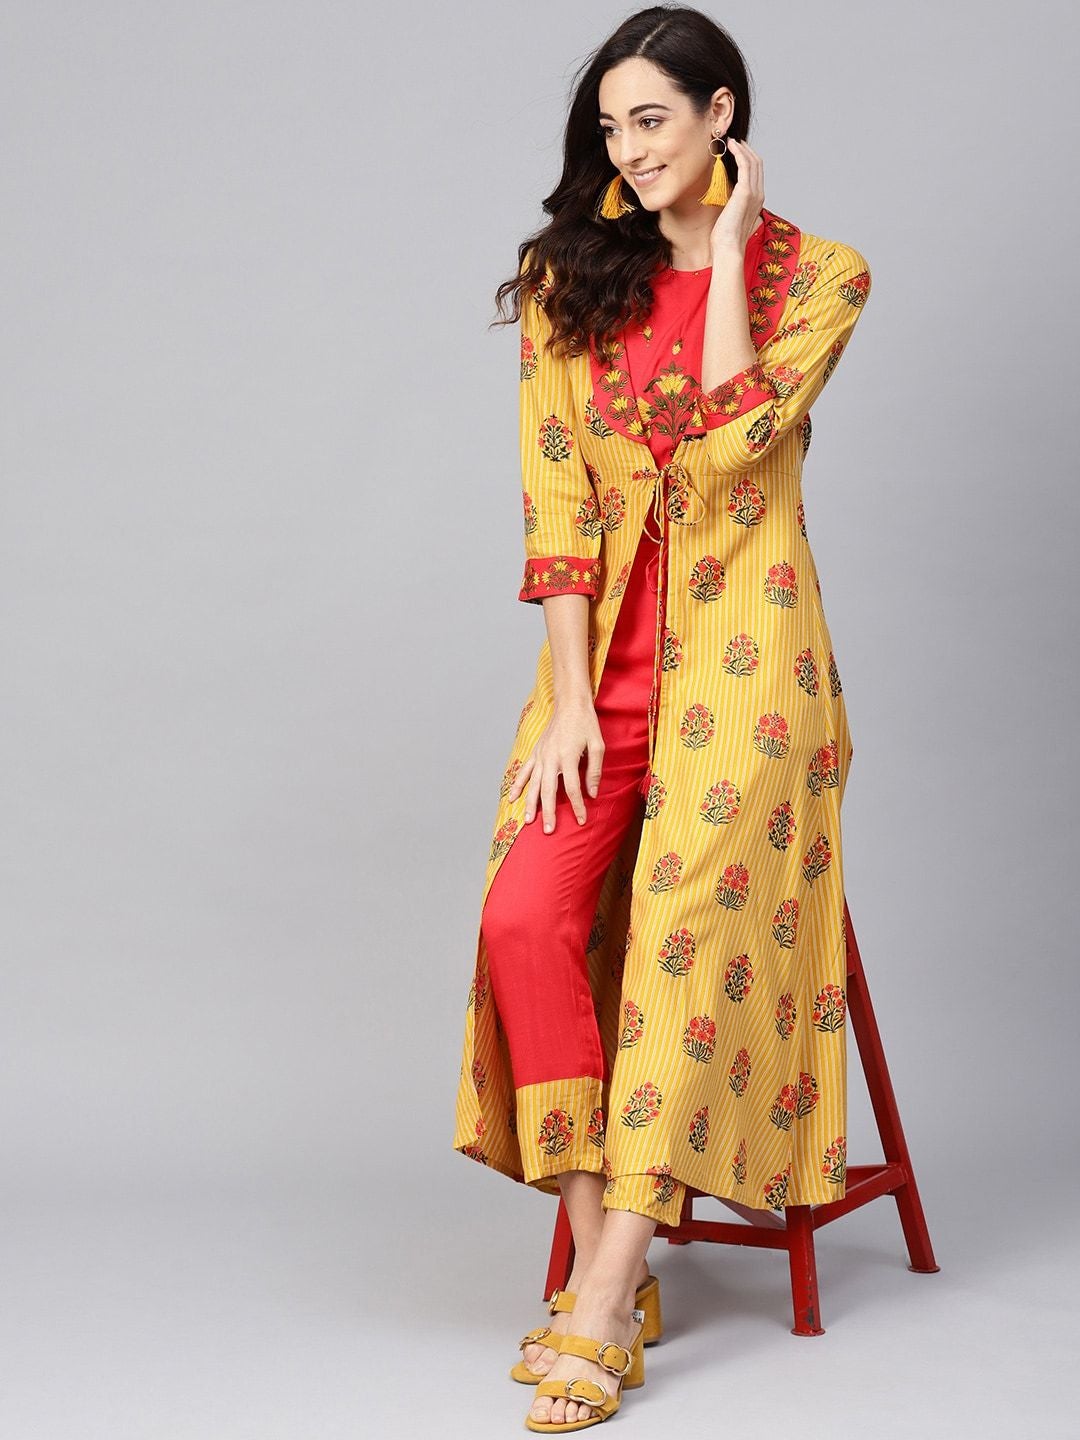 Women's Orange & Mustard Yellow Embroidered Crop Top with Trousers & Ehtnic Jacket - Meeranshi